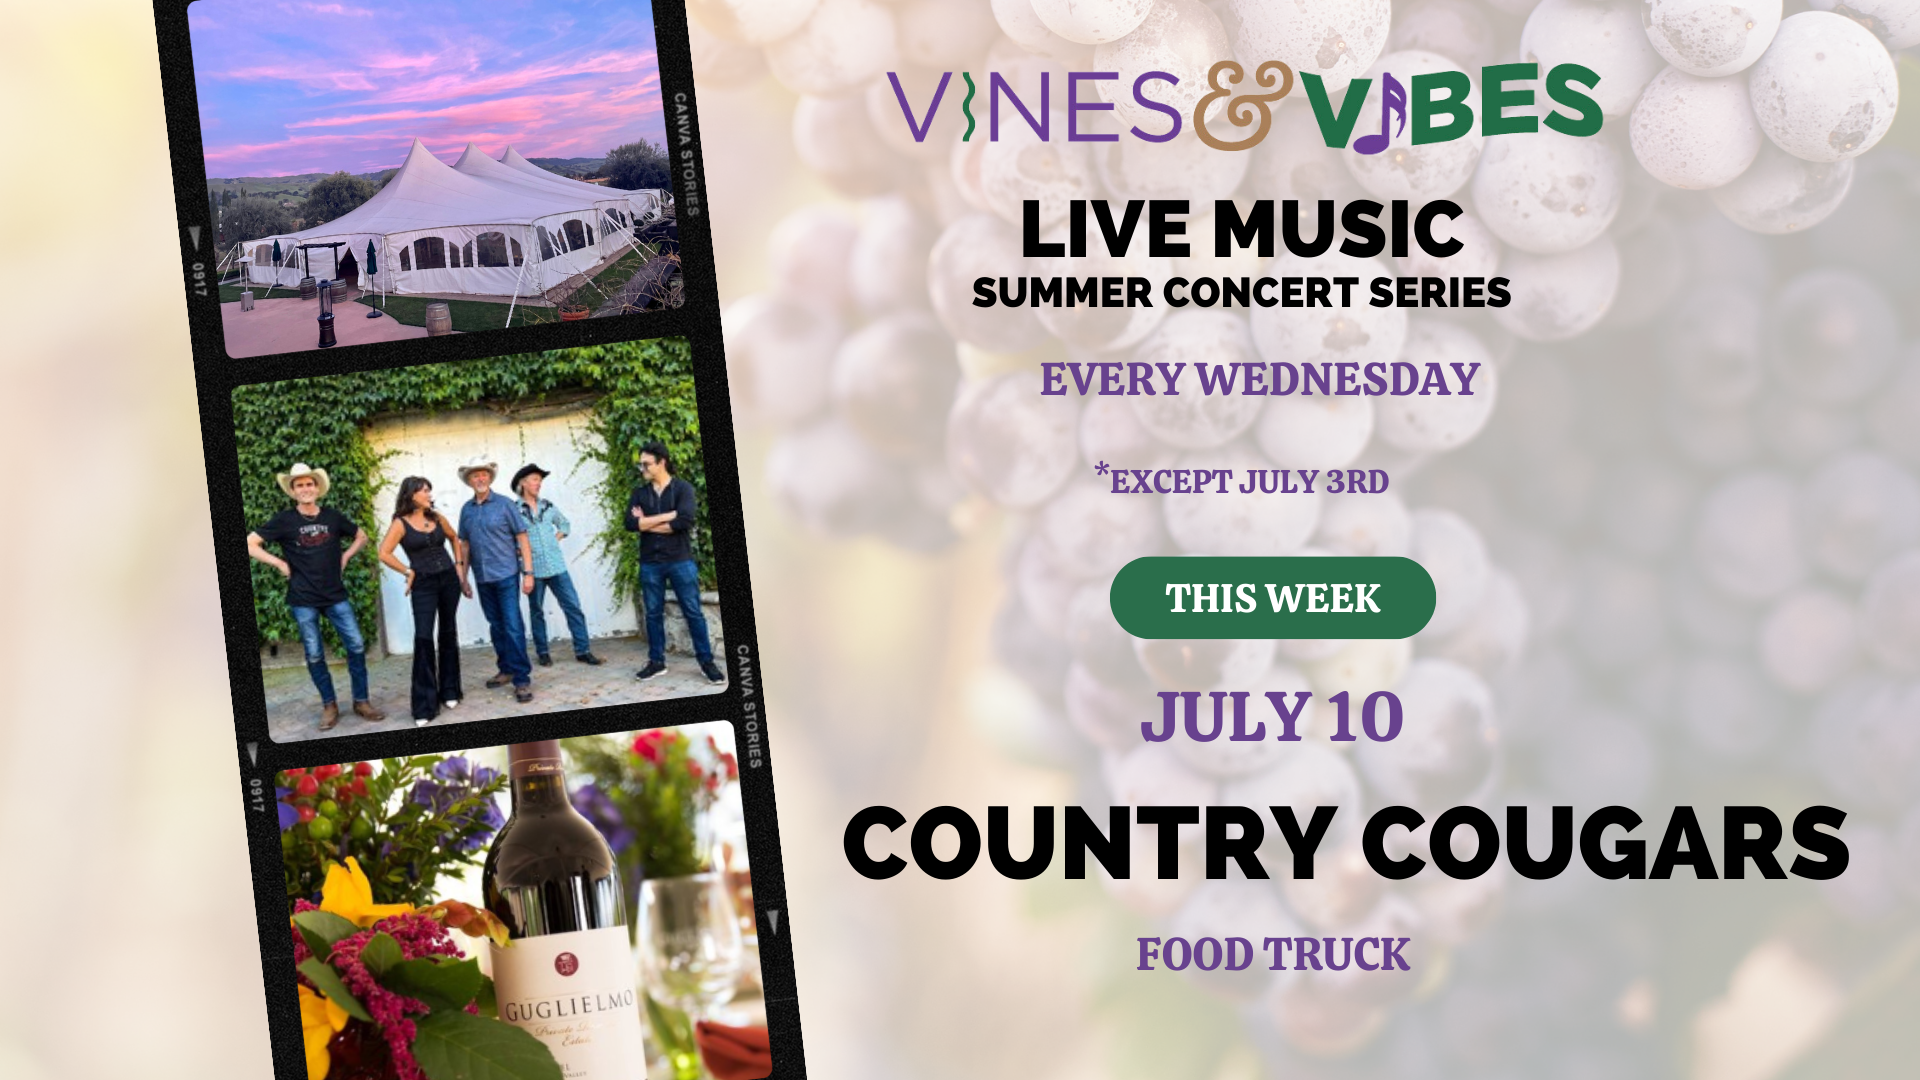 Vines & Vibes Country Cougars